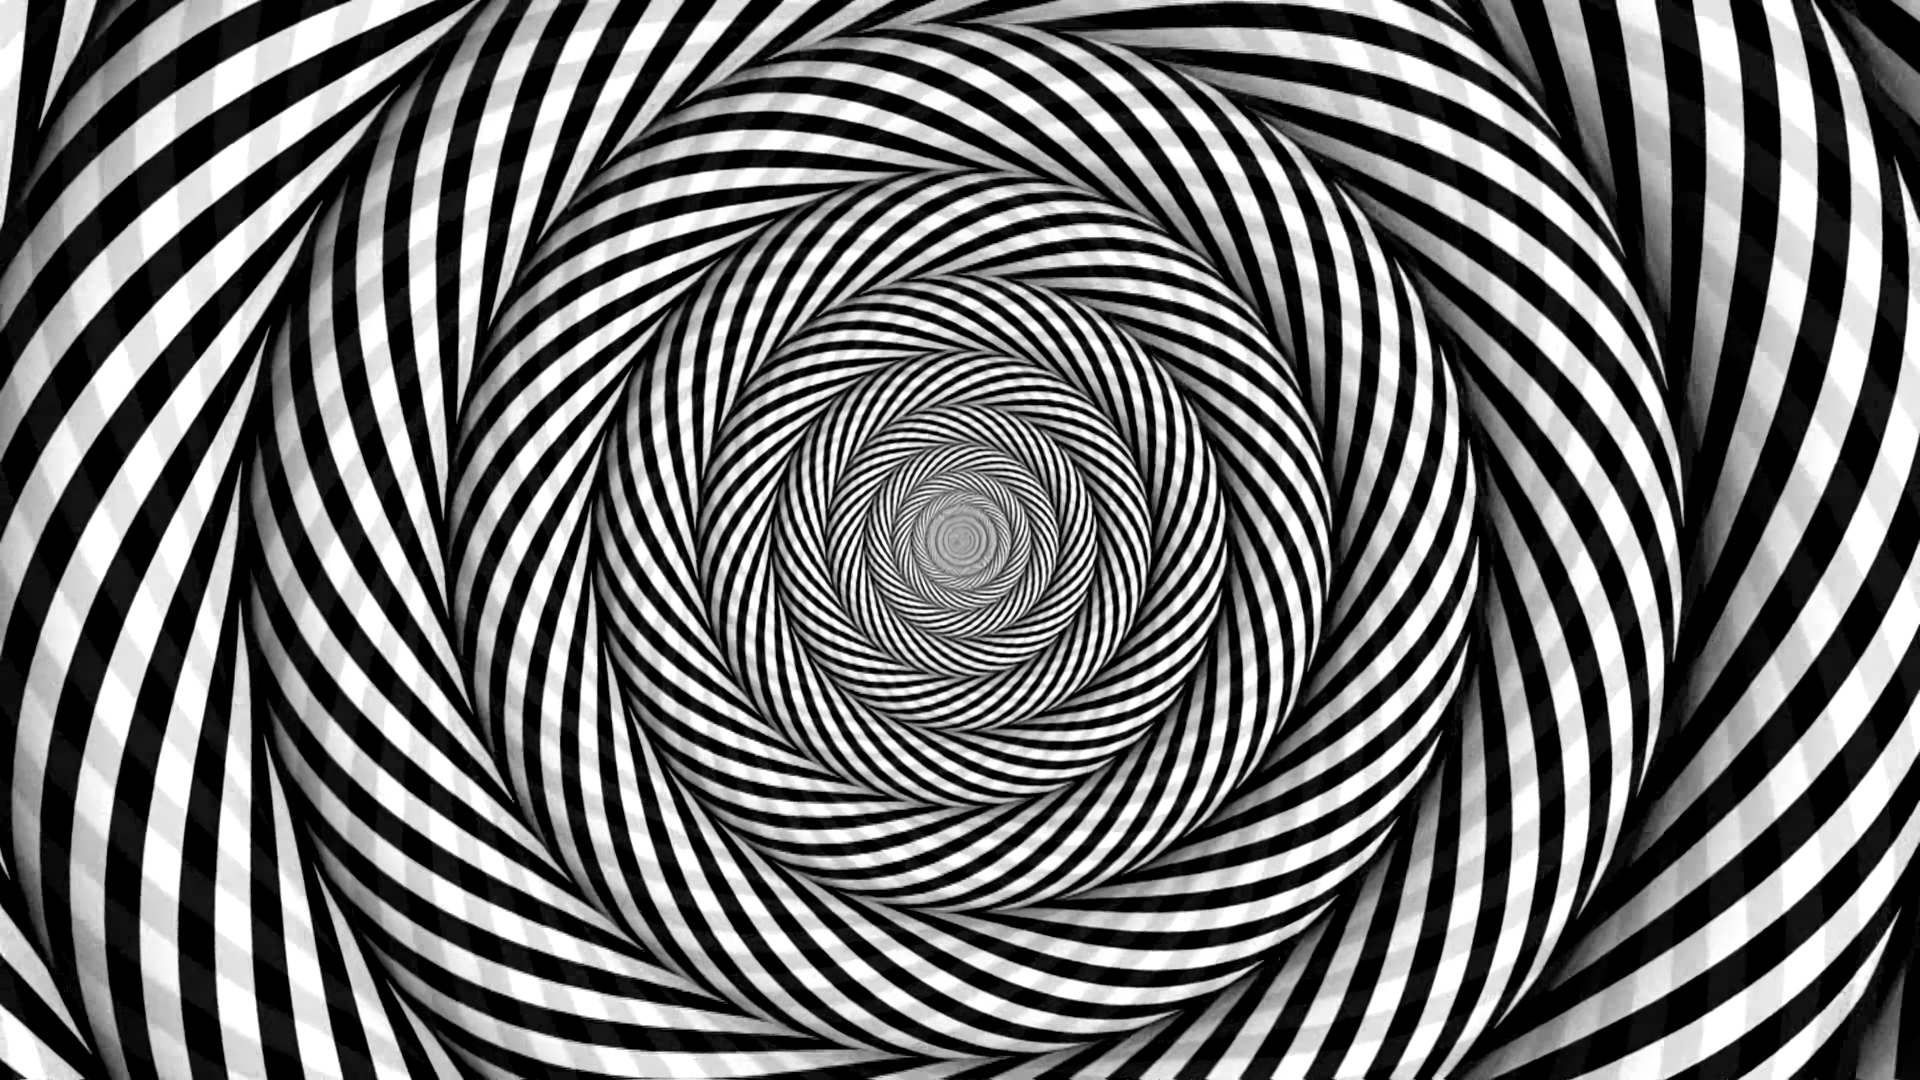 1920x1080 Black and White Optical Illusion Wallpaper Background Image. 